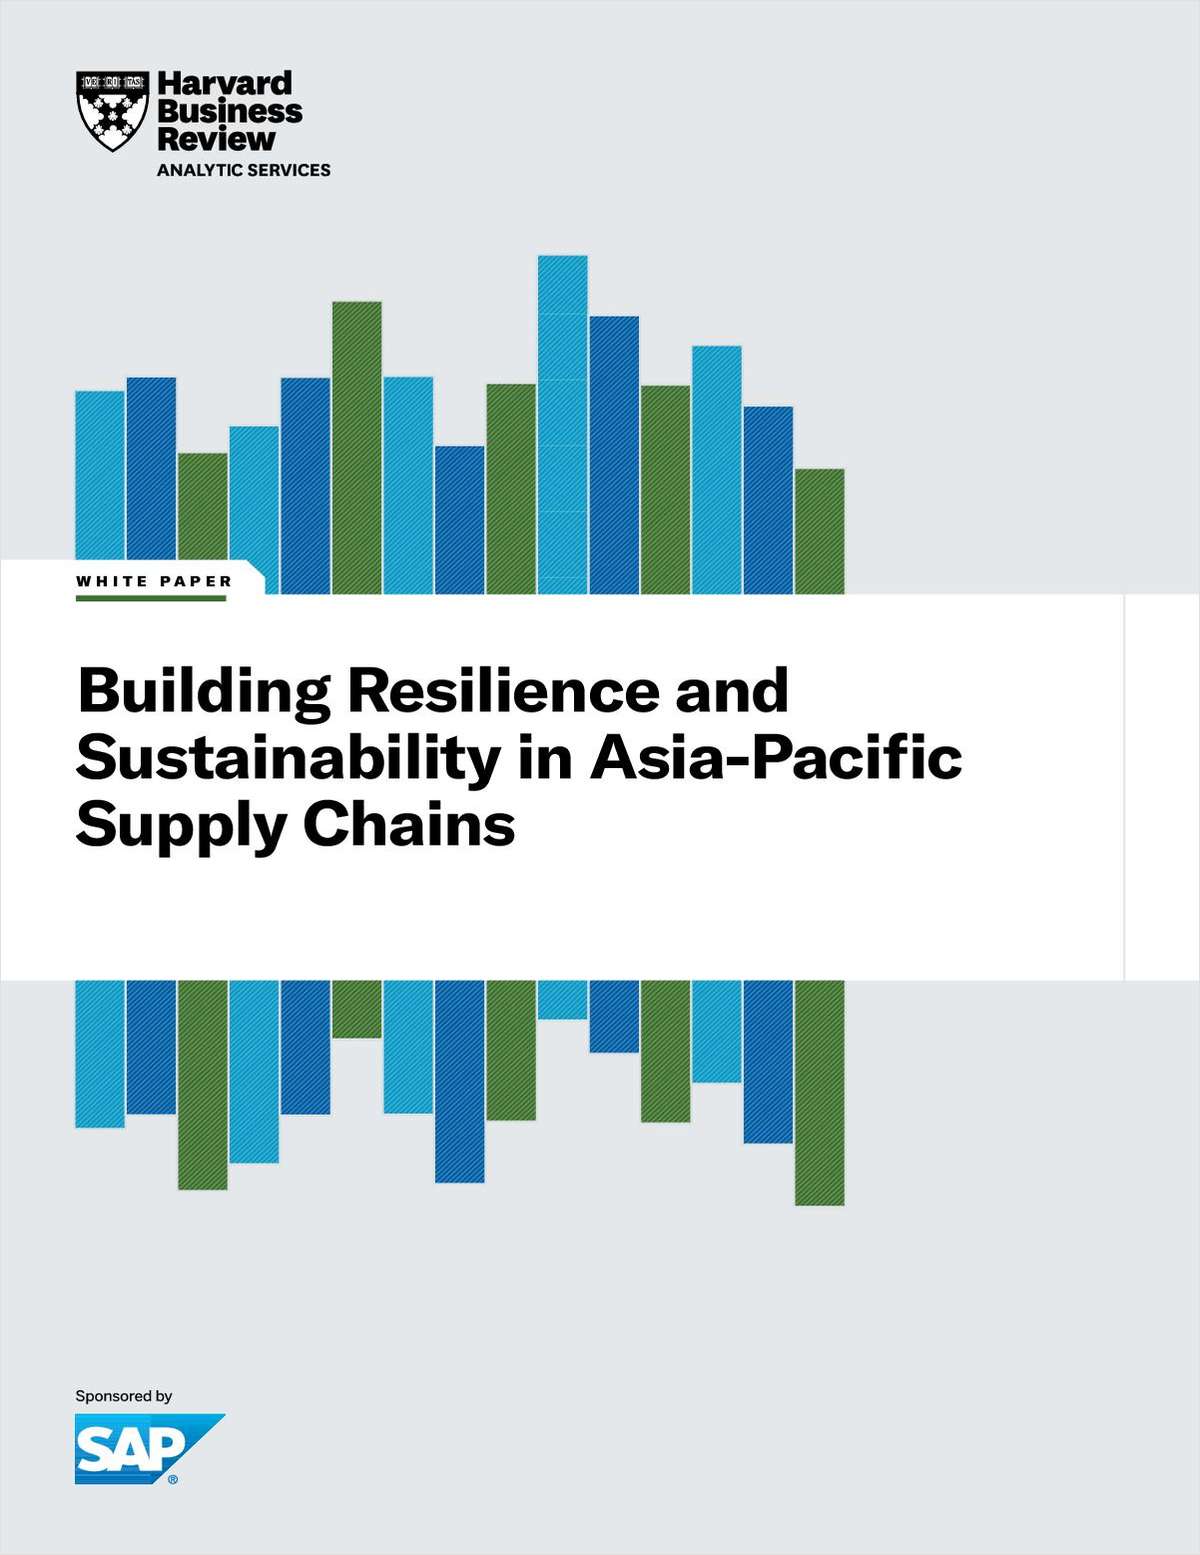 Building Resilience and Sustainability in Asia-Pacific Supply Chains